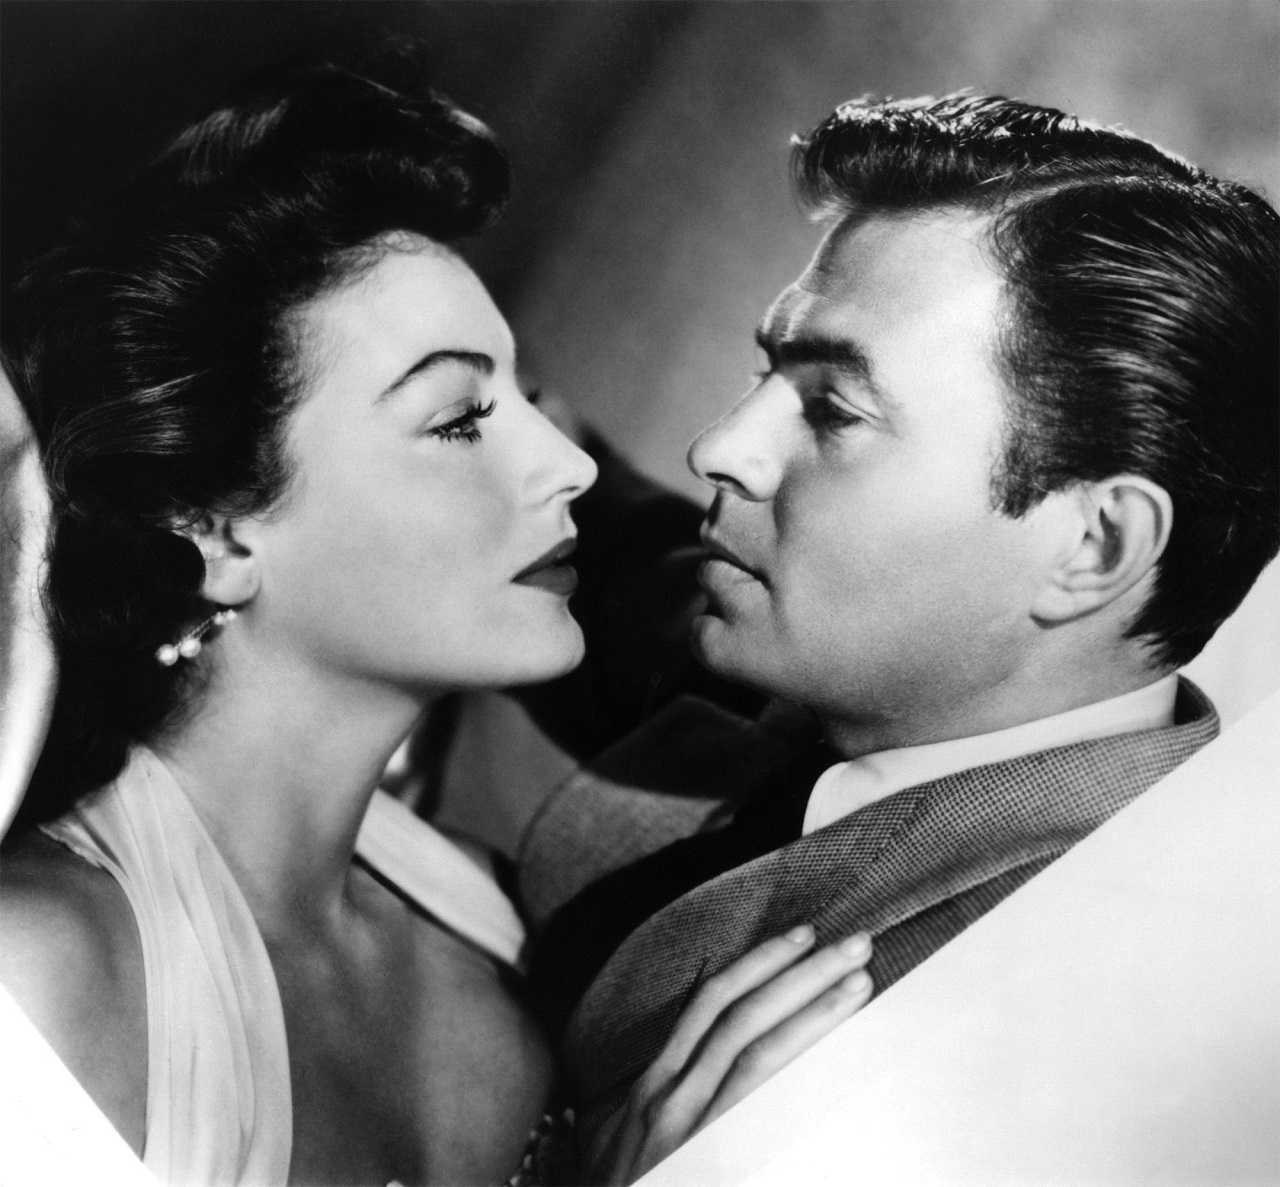 Ava Gardner and James Mason in Pandora and the Flying Dutchman (1951)